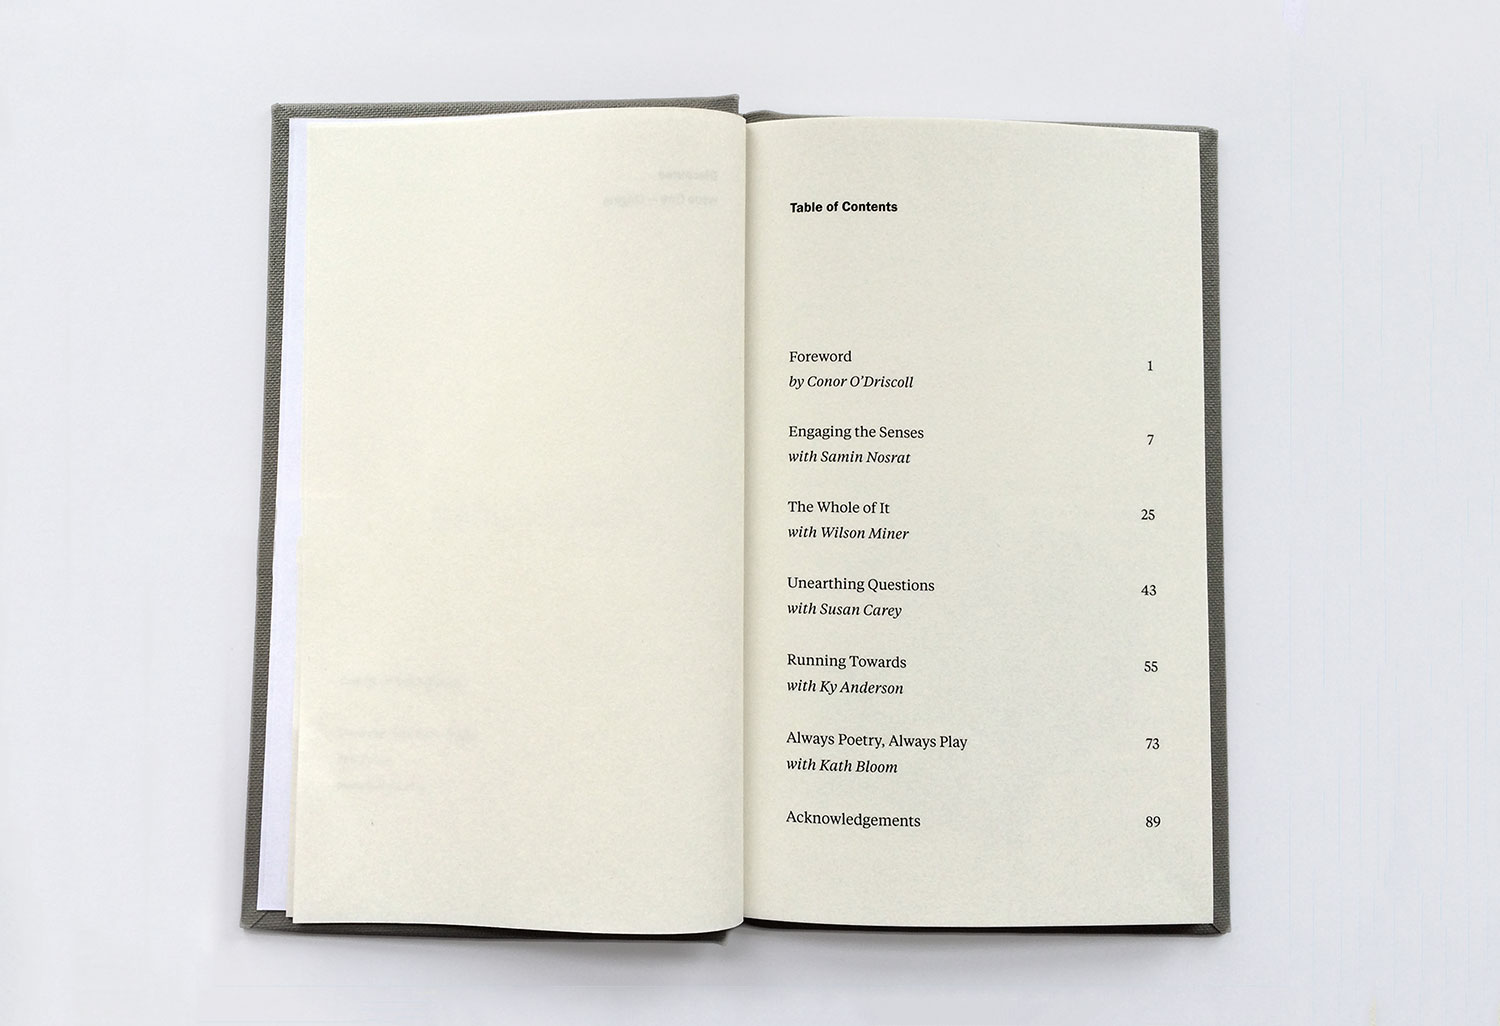 The book's table of contents